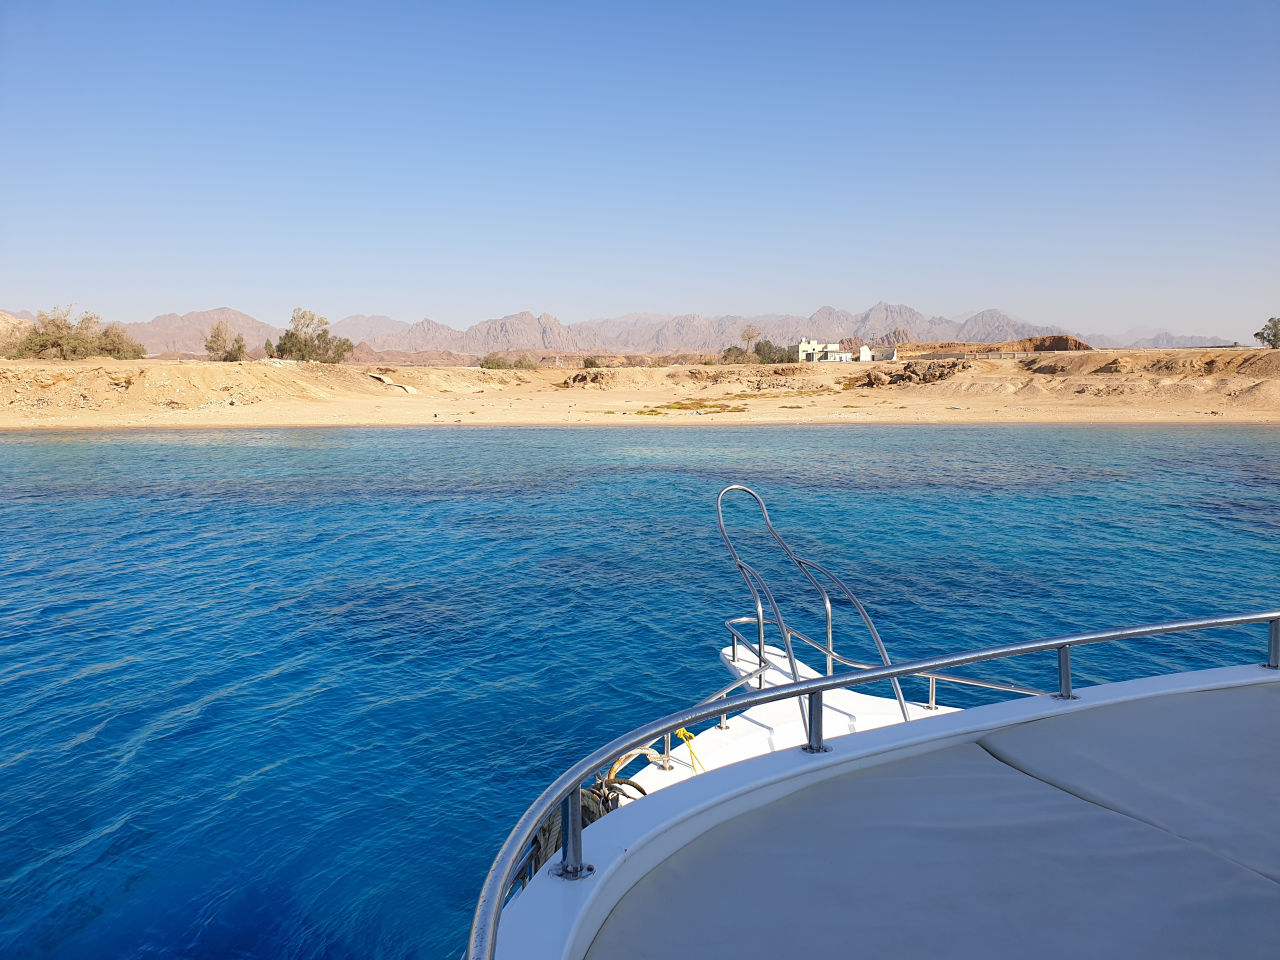 The best company to book a diving safari in Marsa Alam